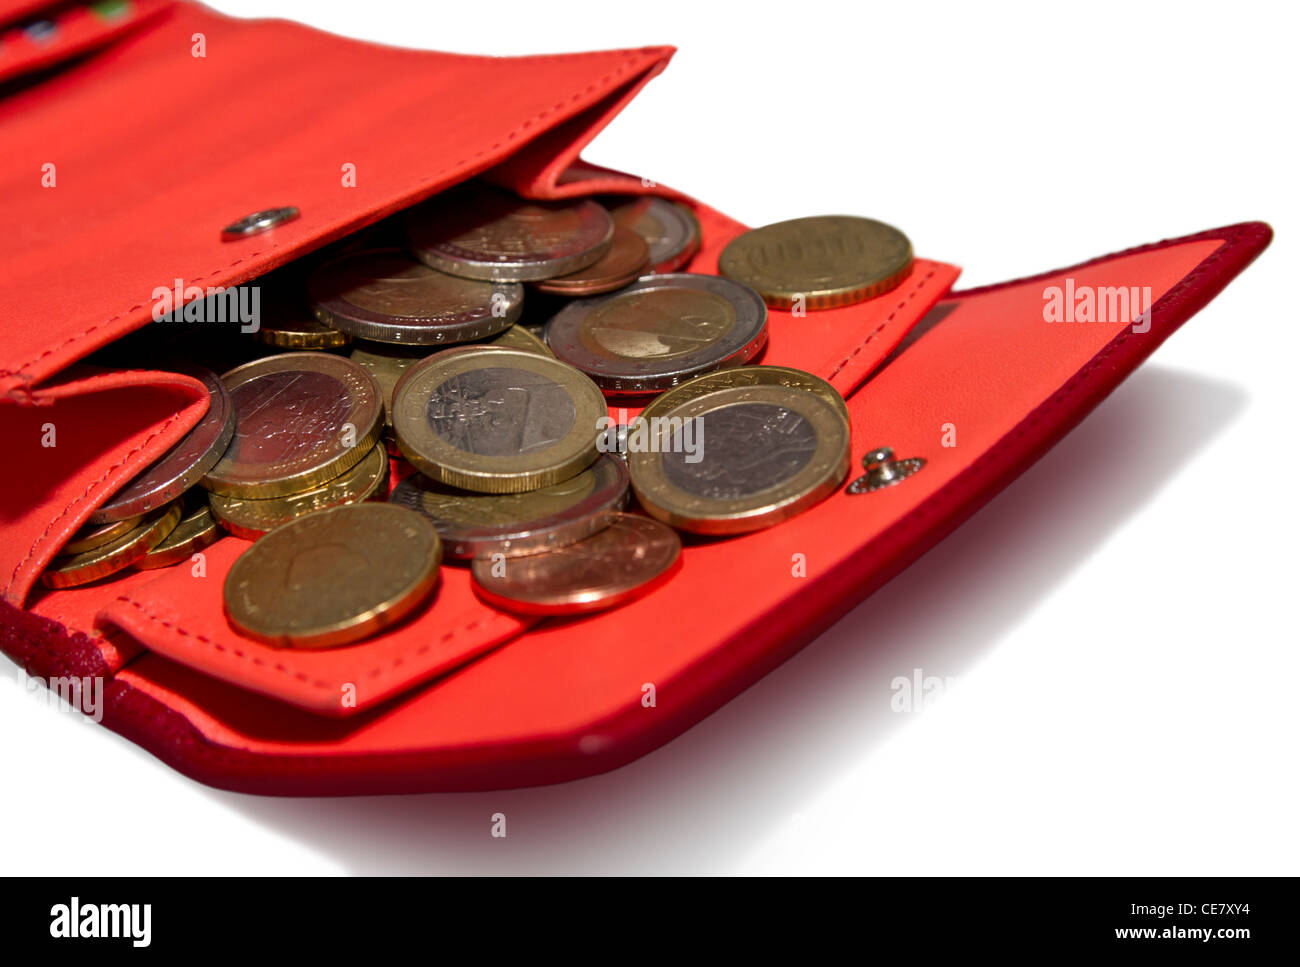 Red wallet with euro coins Stock Photo